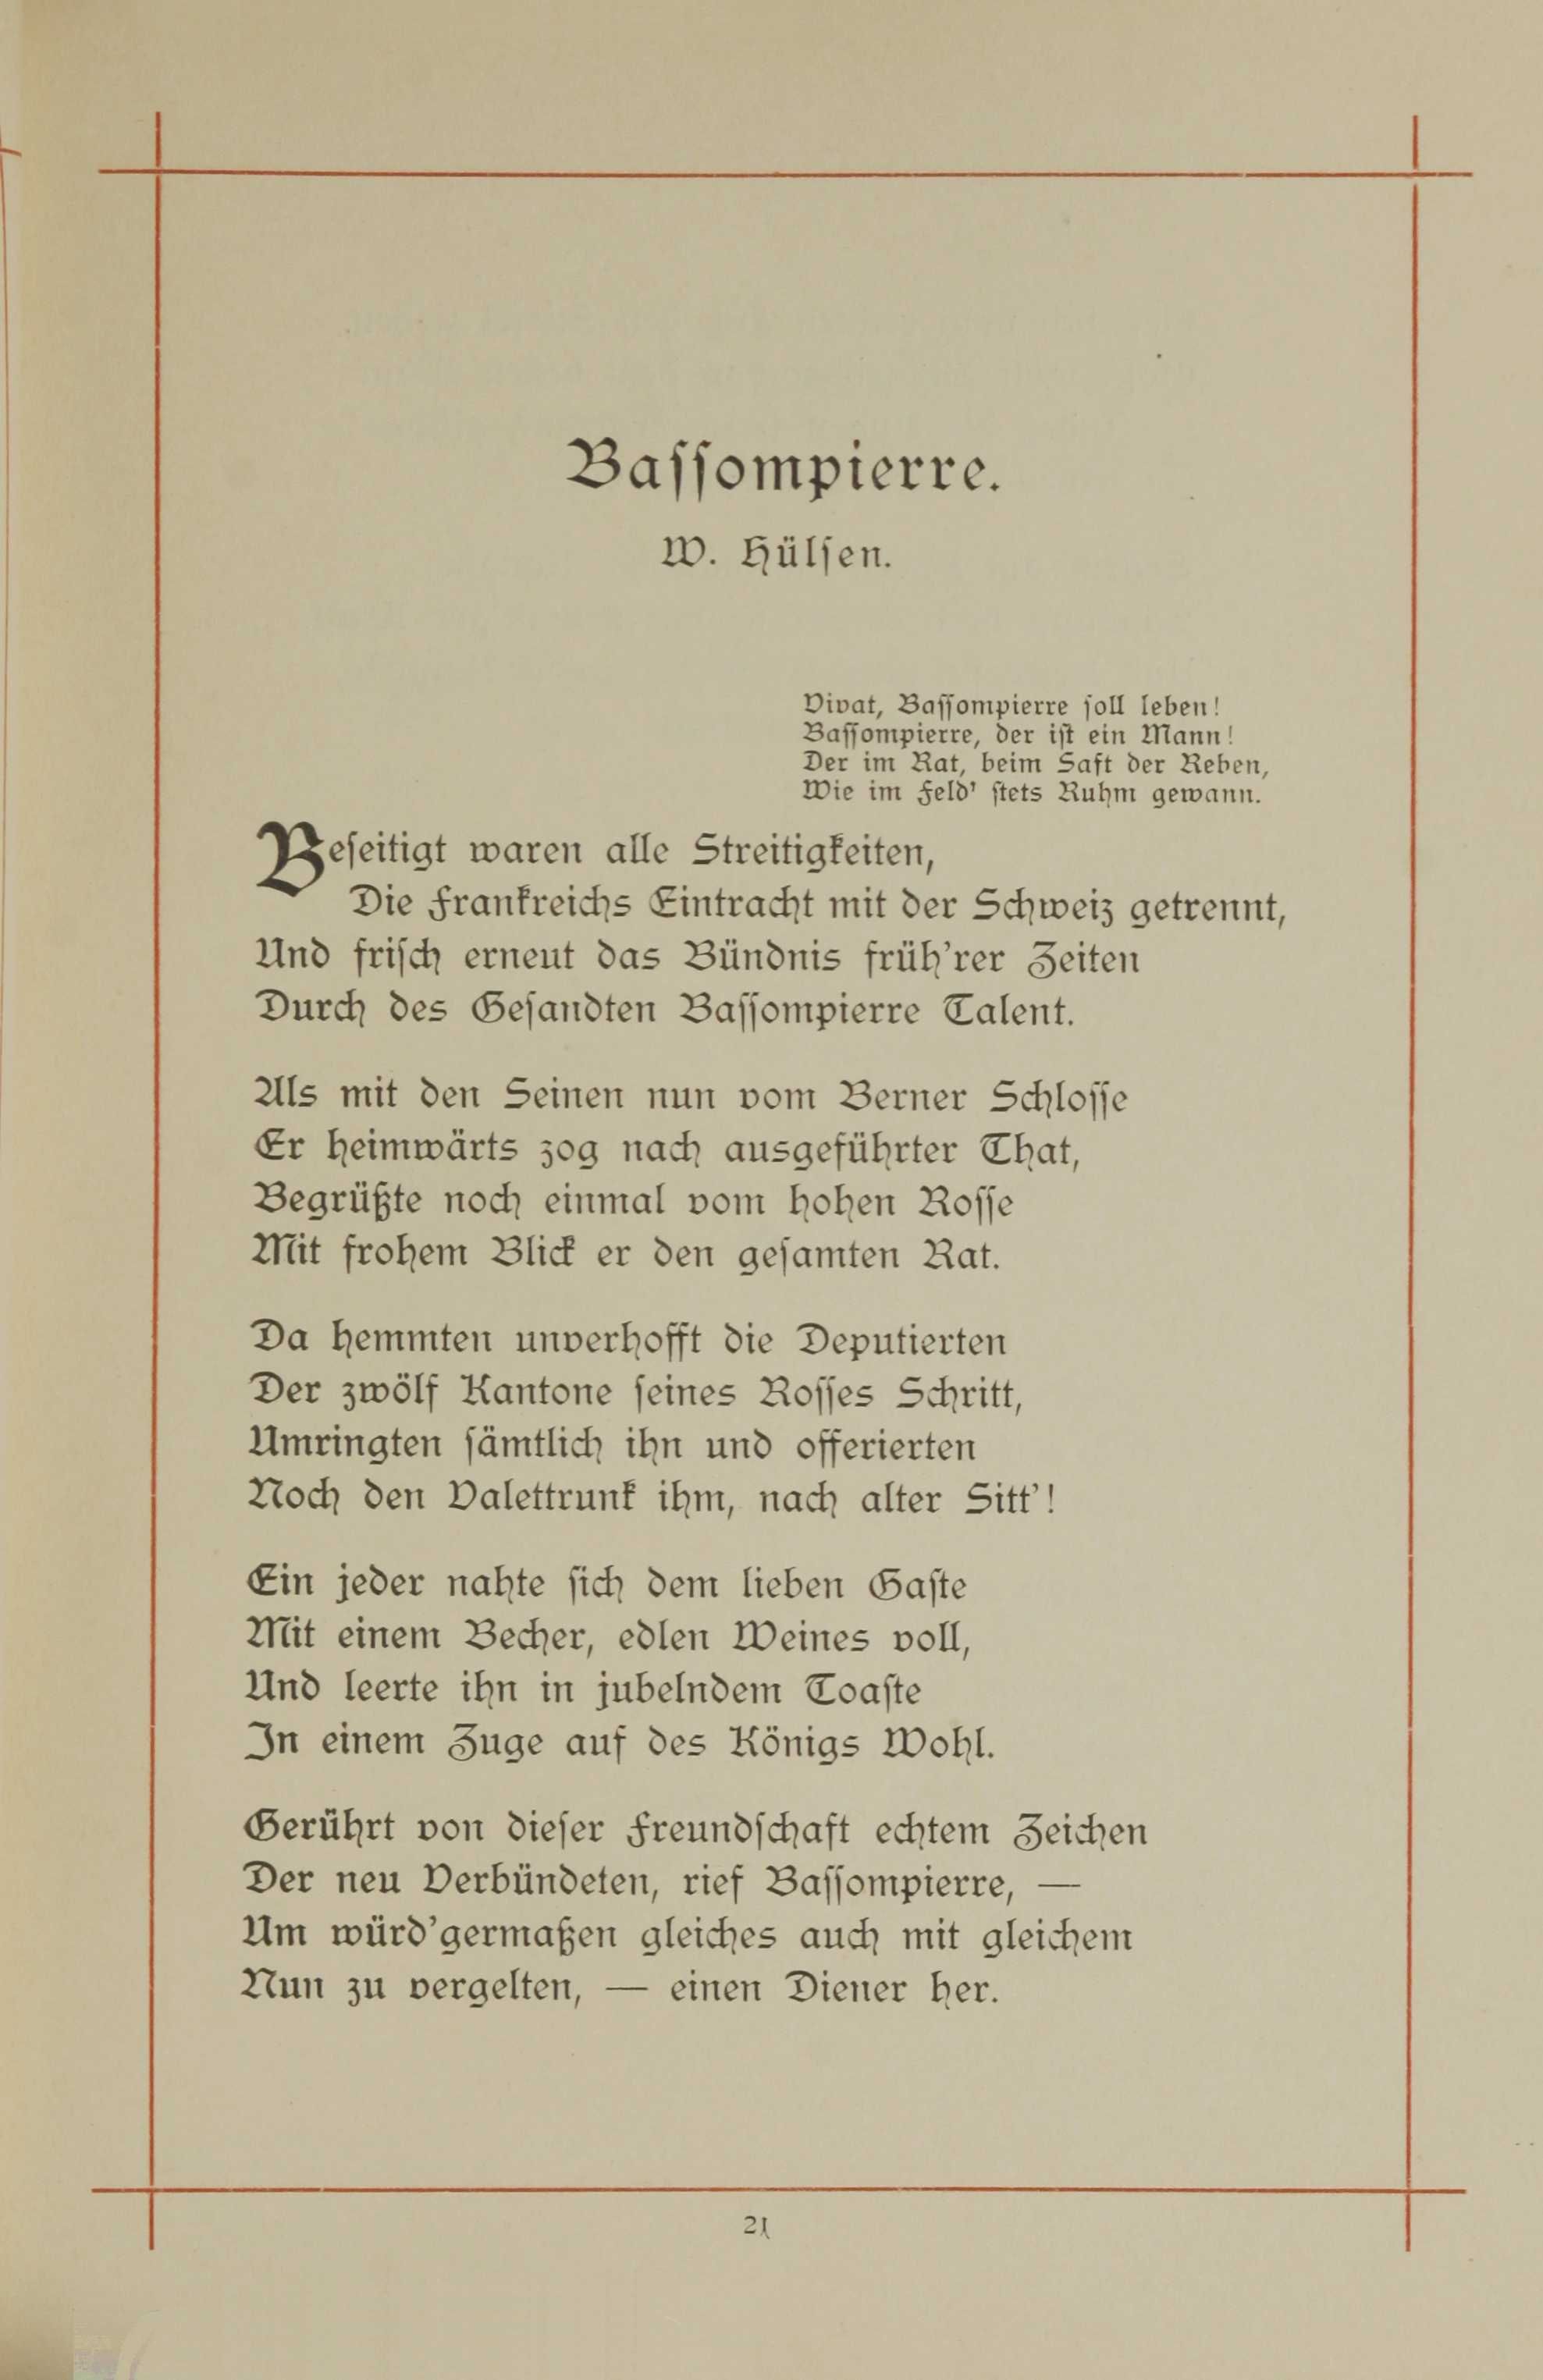 Bassompierre (1893) | 1. (21) Main body of text